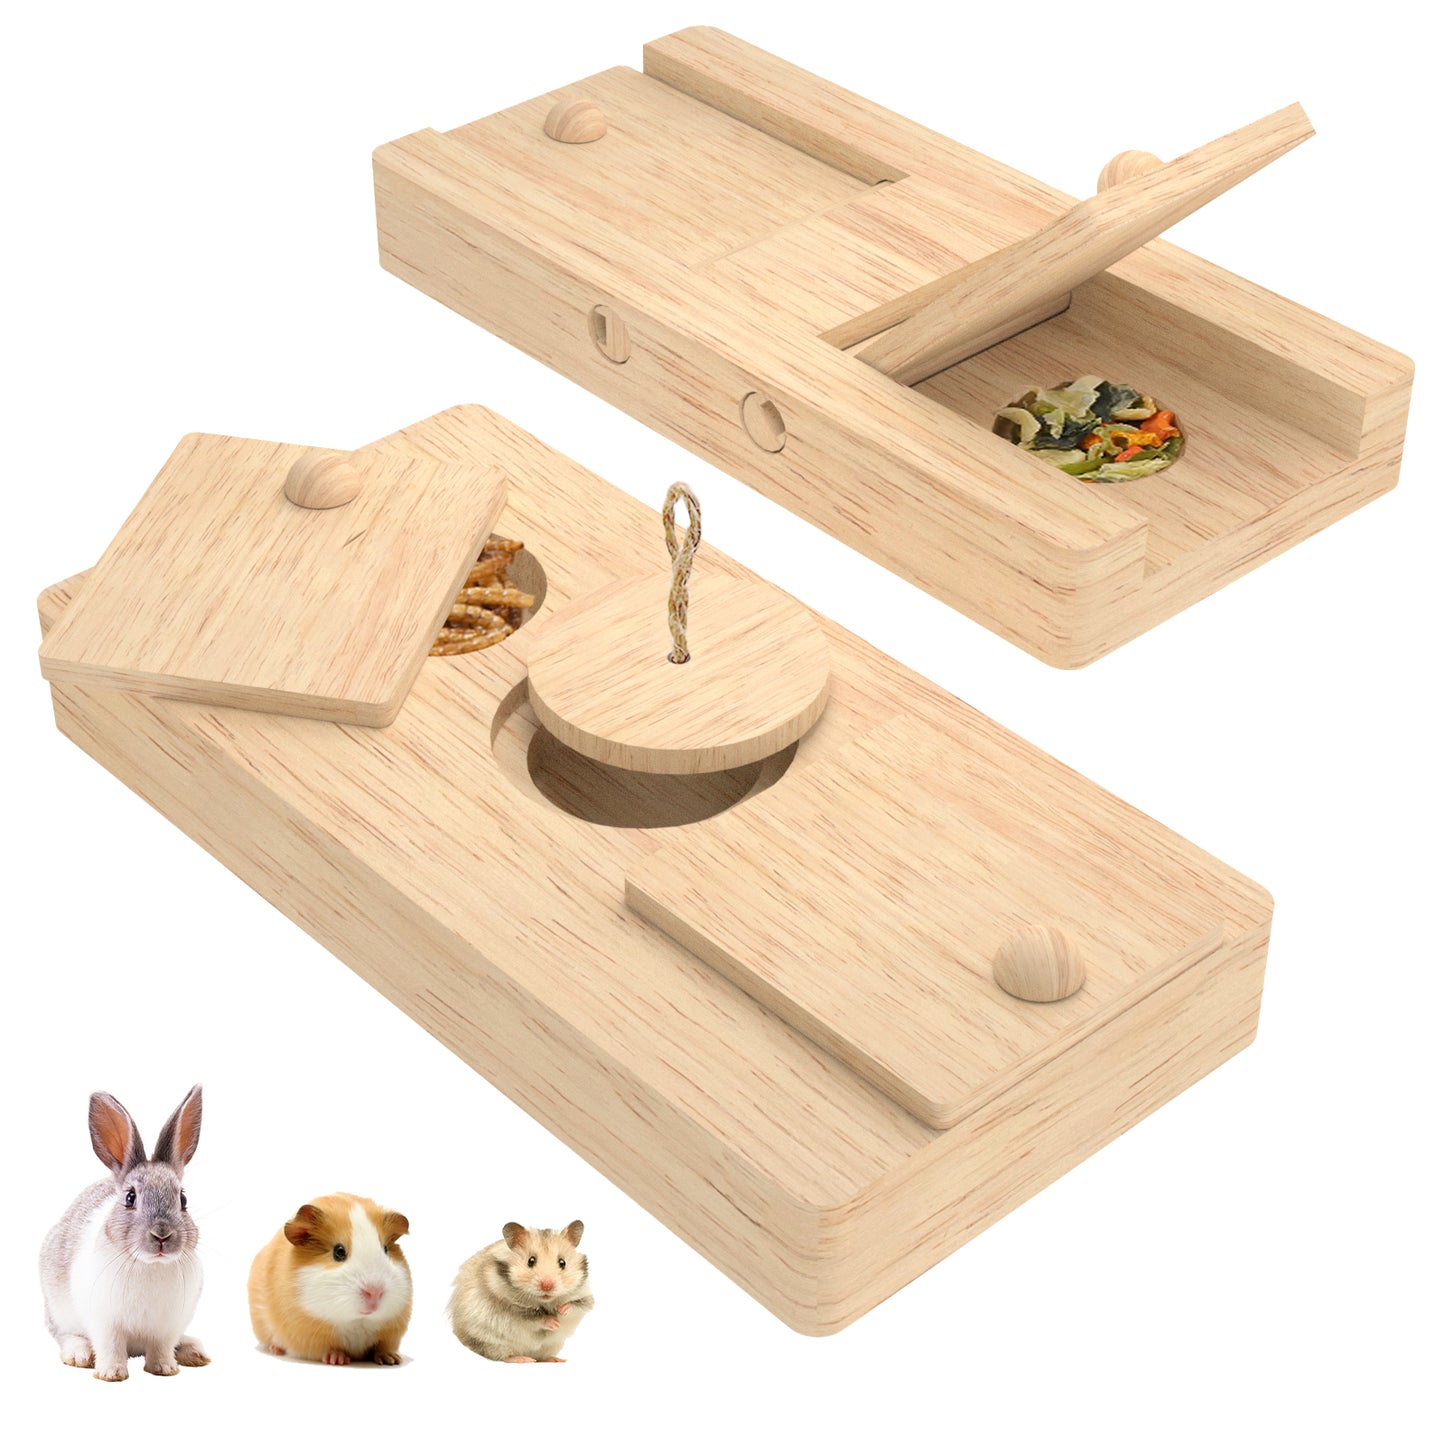 Hamsters Toy Wooden Enrichment Foraging Toy for Small Pet